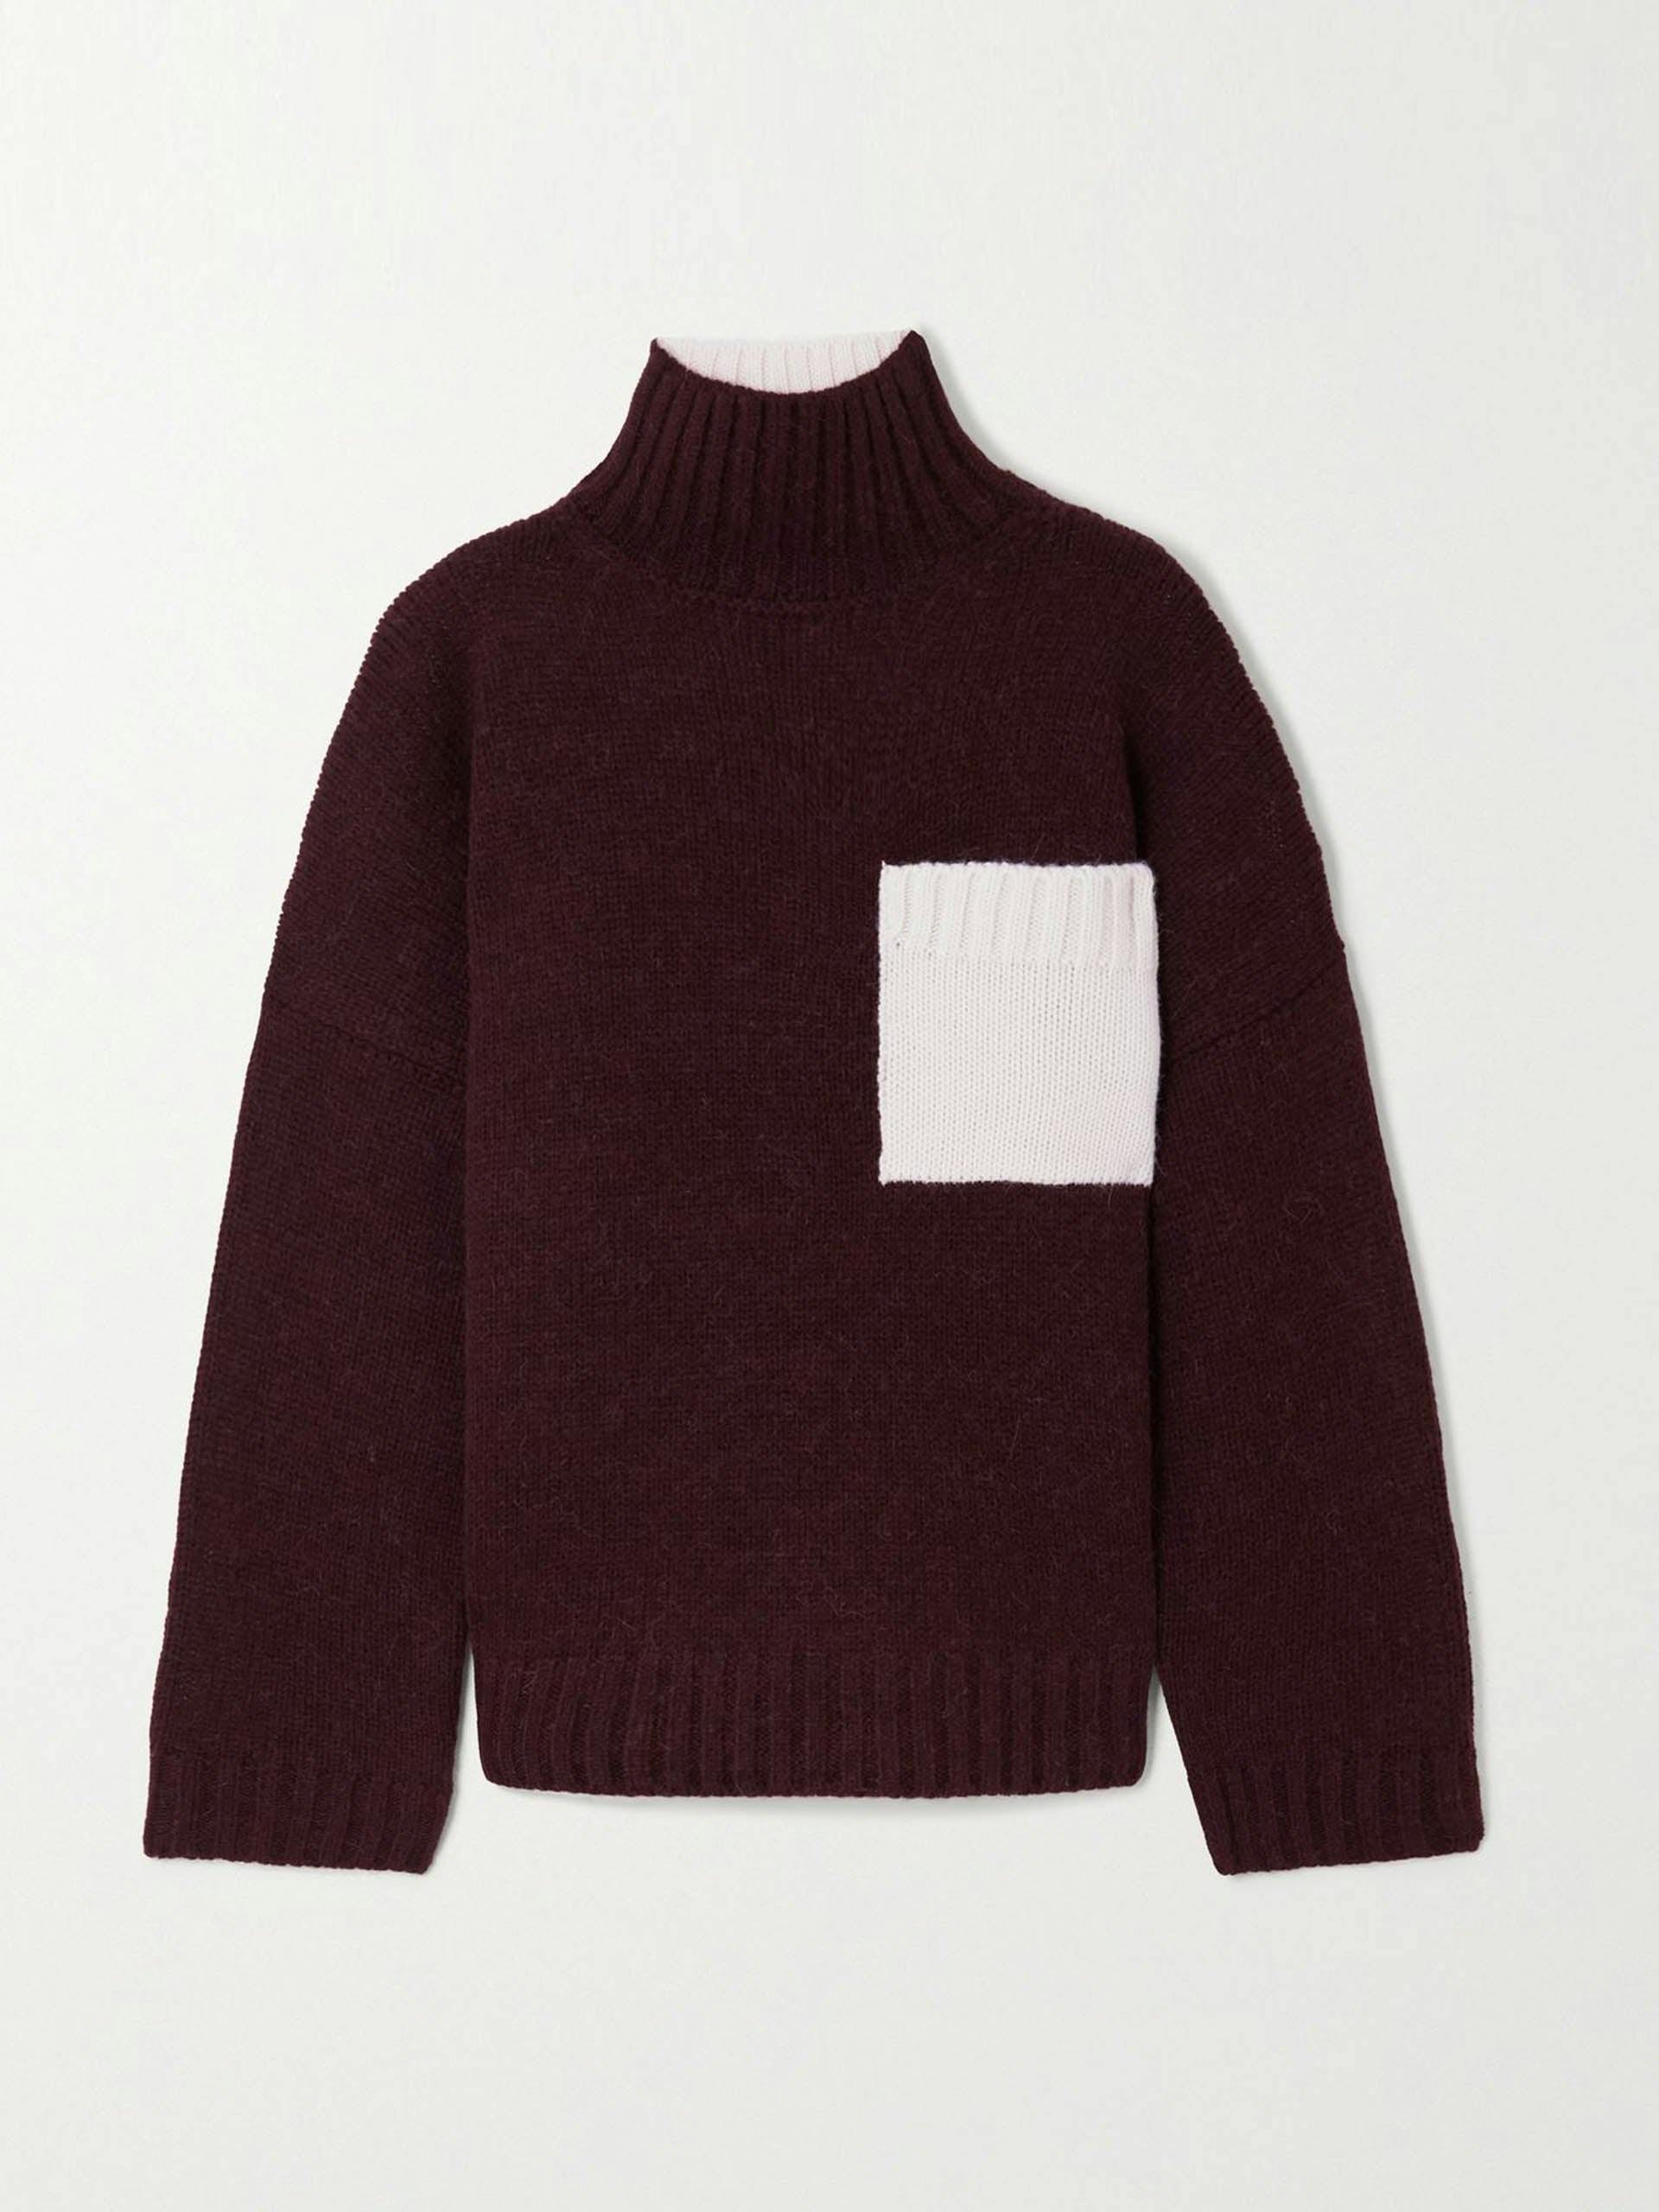 Burgundy two-tone knitted turtleneck sweater